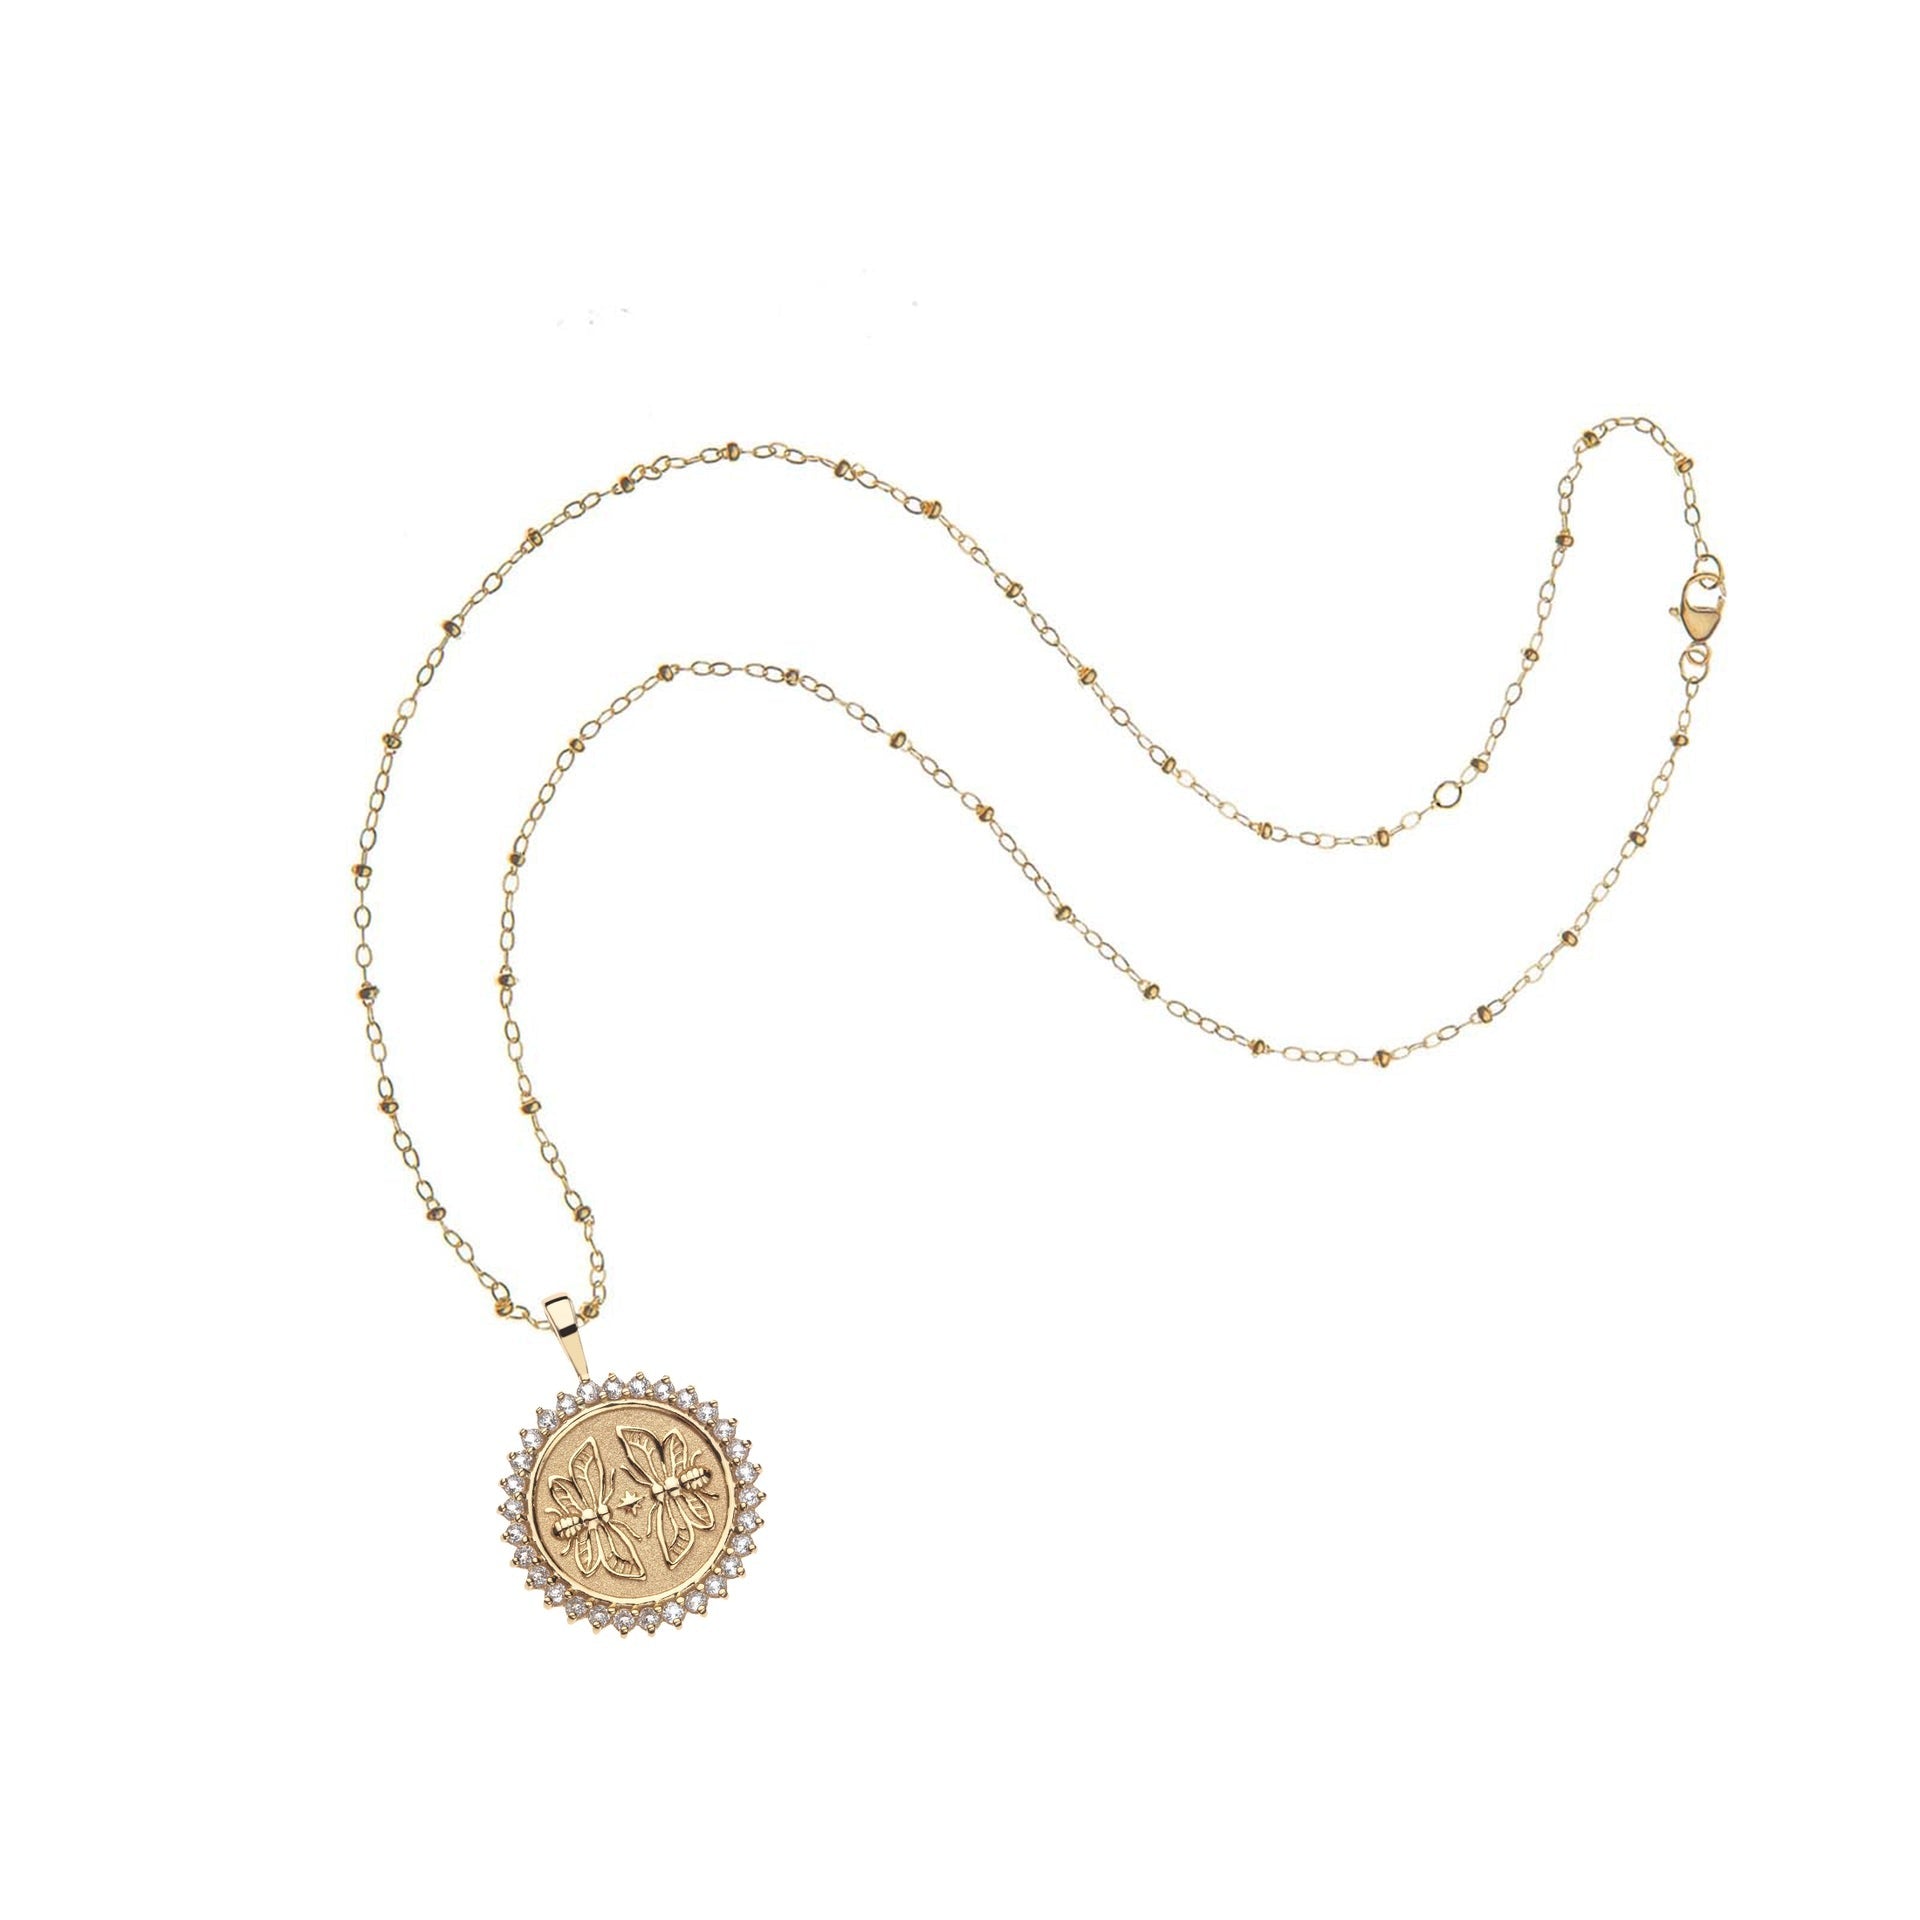 Jane Win SISTERS Forever Petite Embellished Coin Pendant Necklace